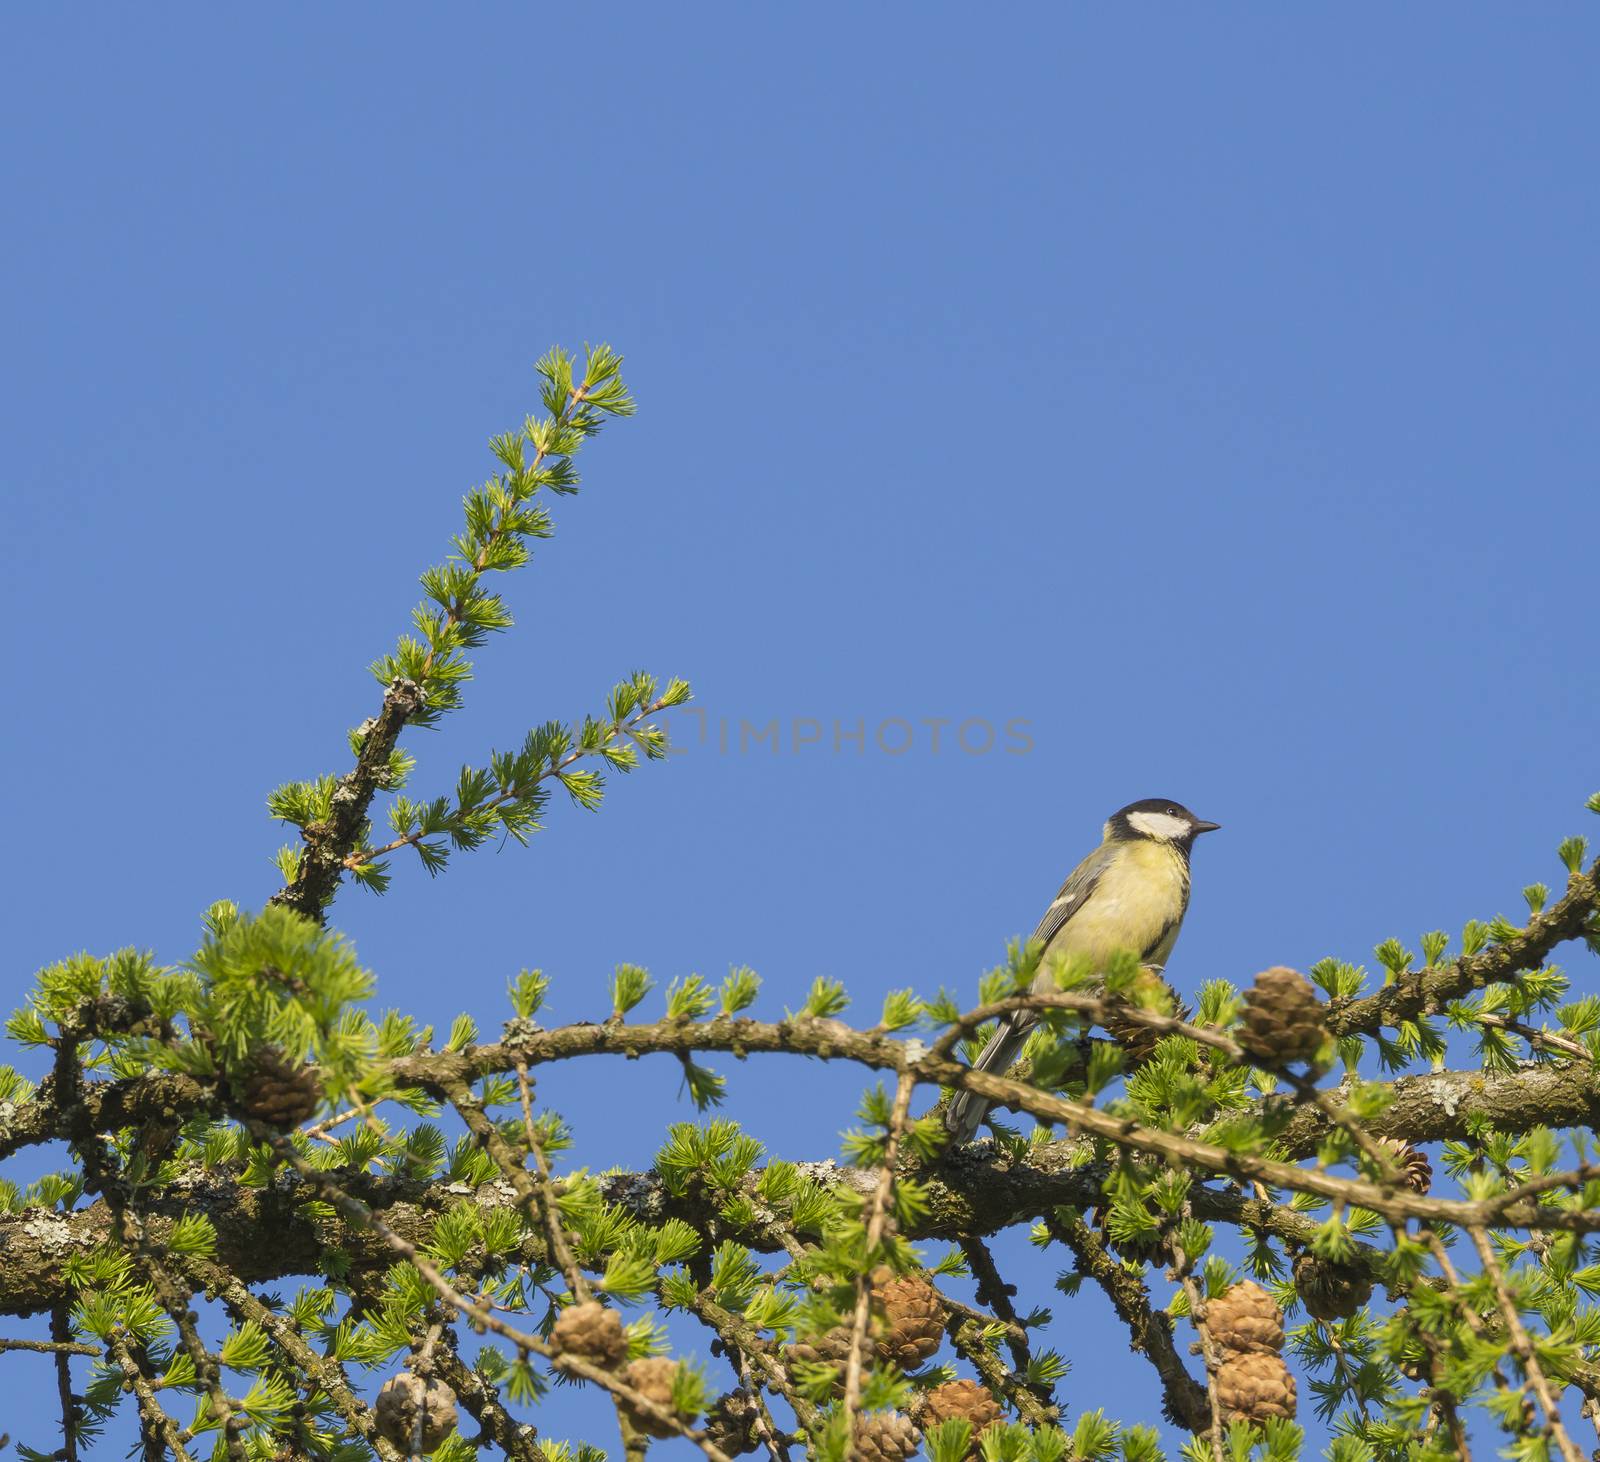 The great tit The great tit Parus major bird sitting on lush spring green larch tree branch, blue sky background, copy space